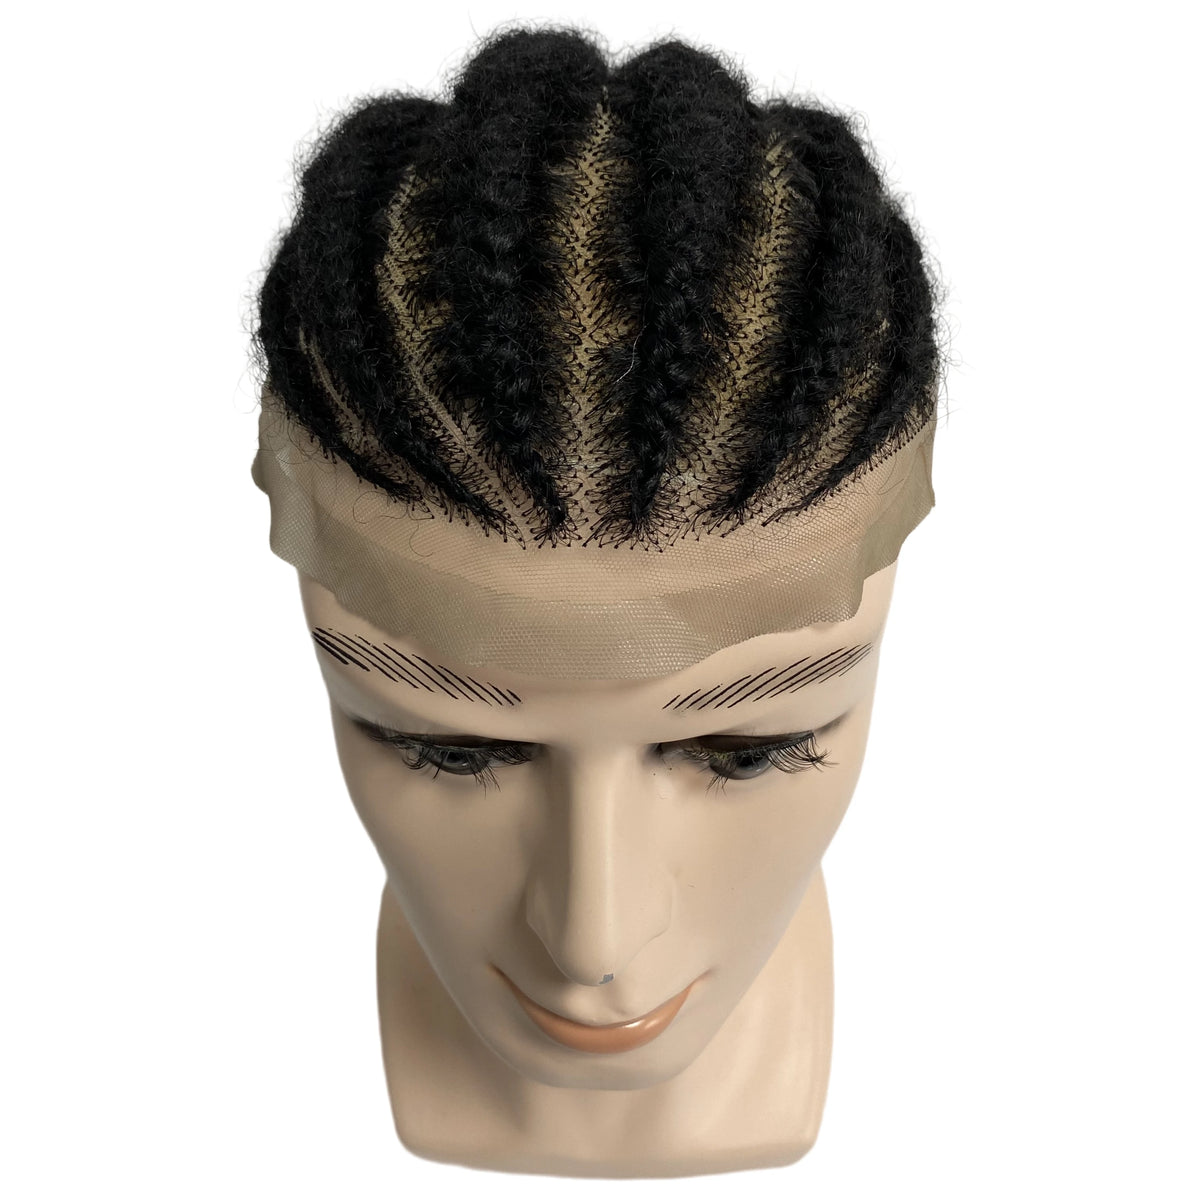 Root Afro Corn Braids Full Lace Replacement Hair System for Men 8x10